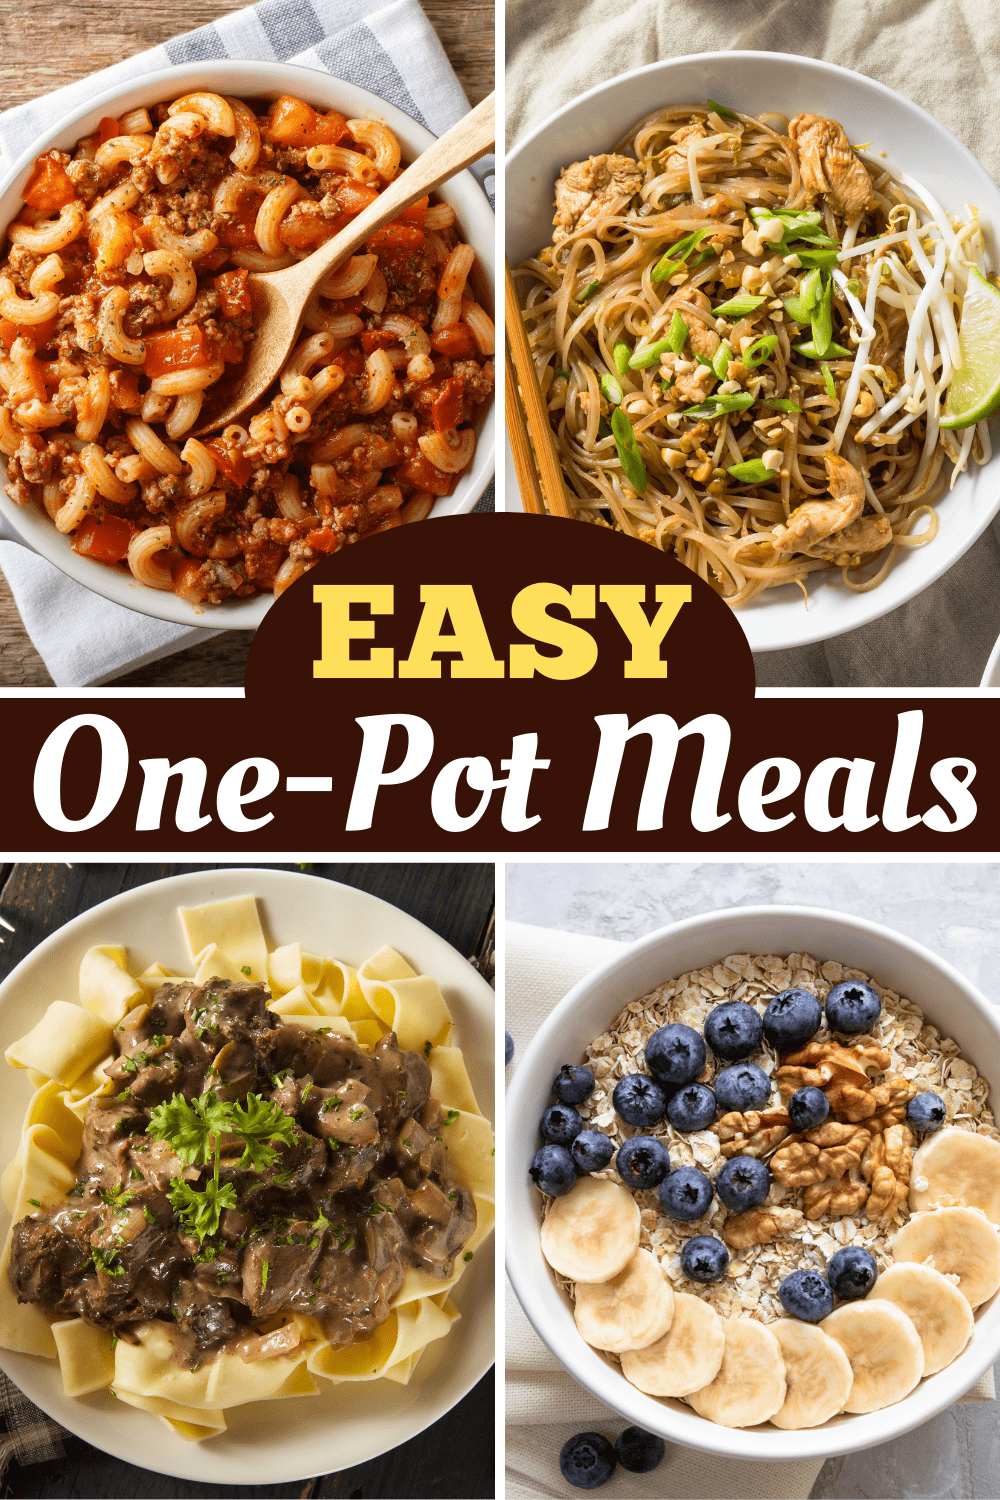 24 Easy One-Pot Meals and Dinner Ideas - Insanely Good